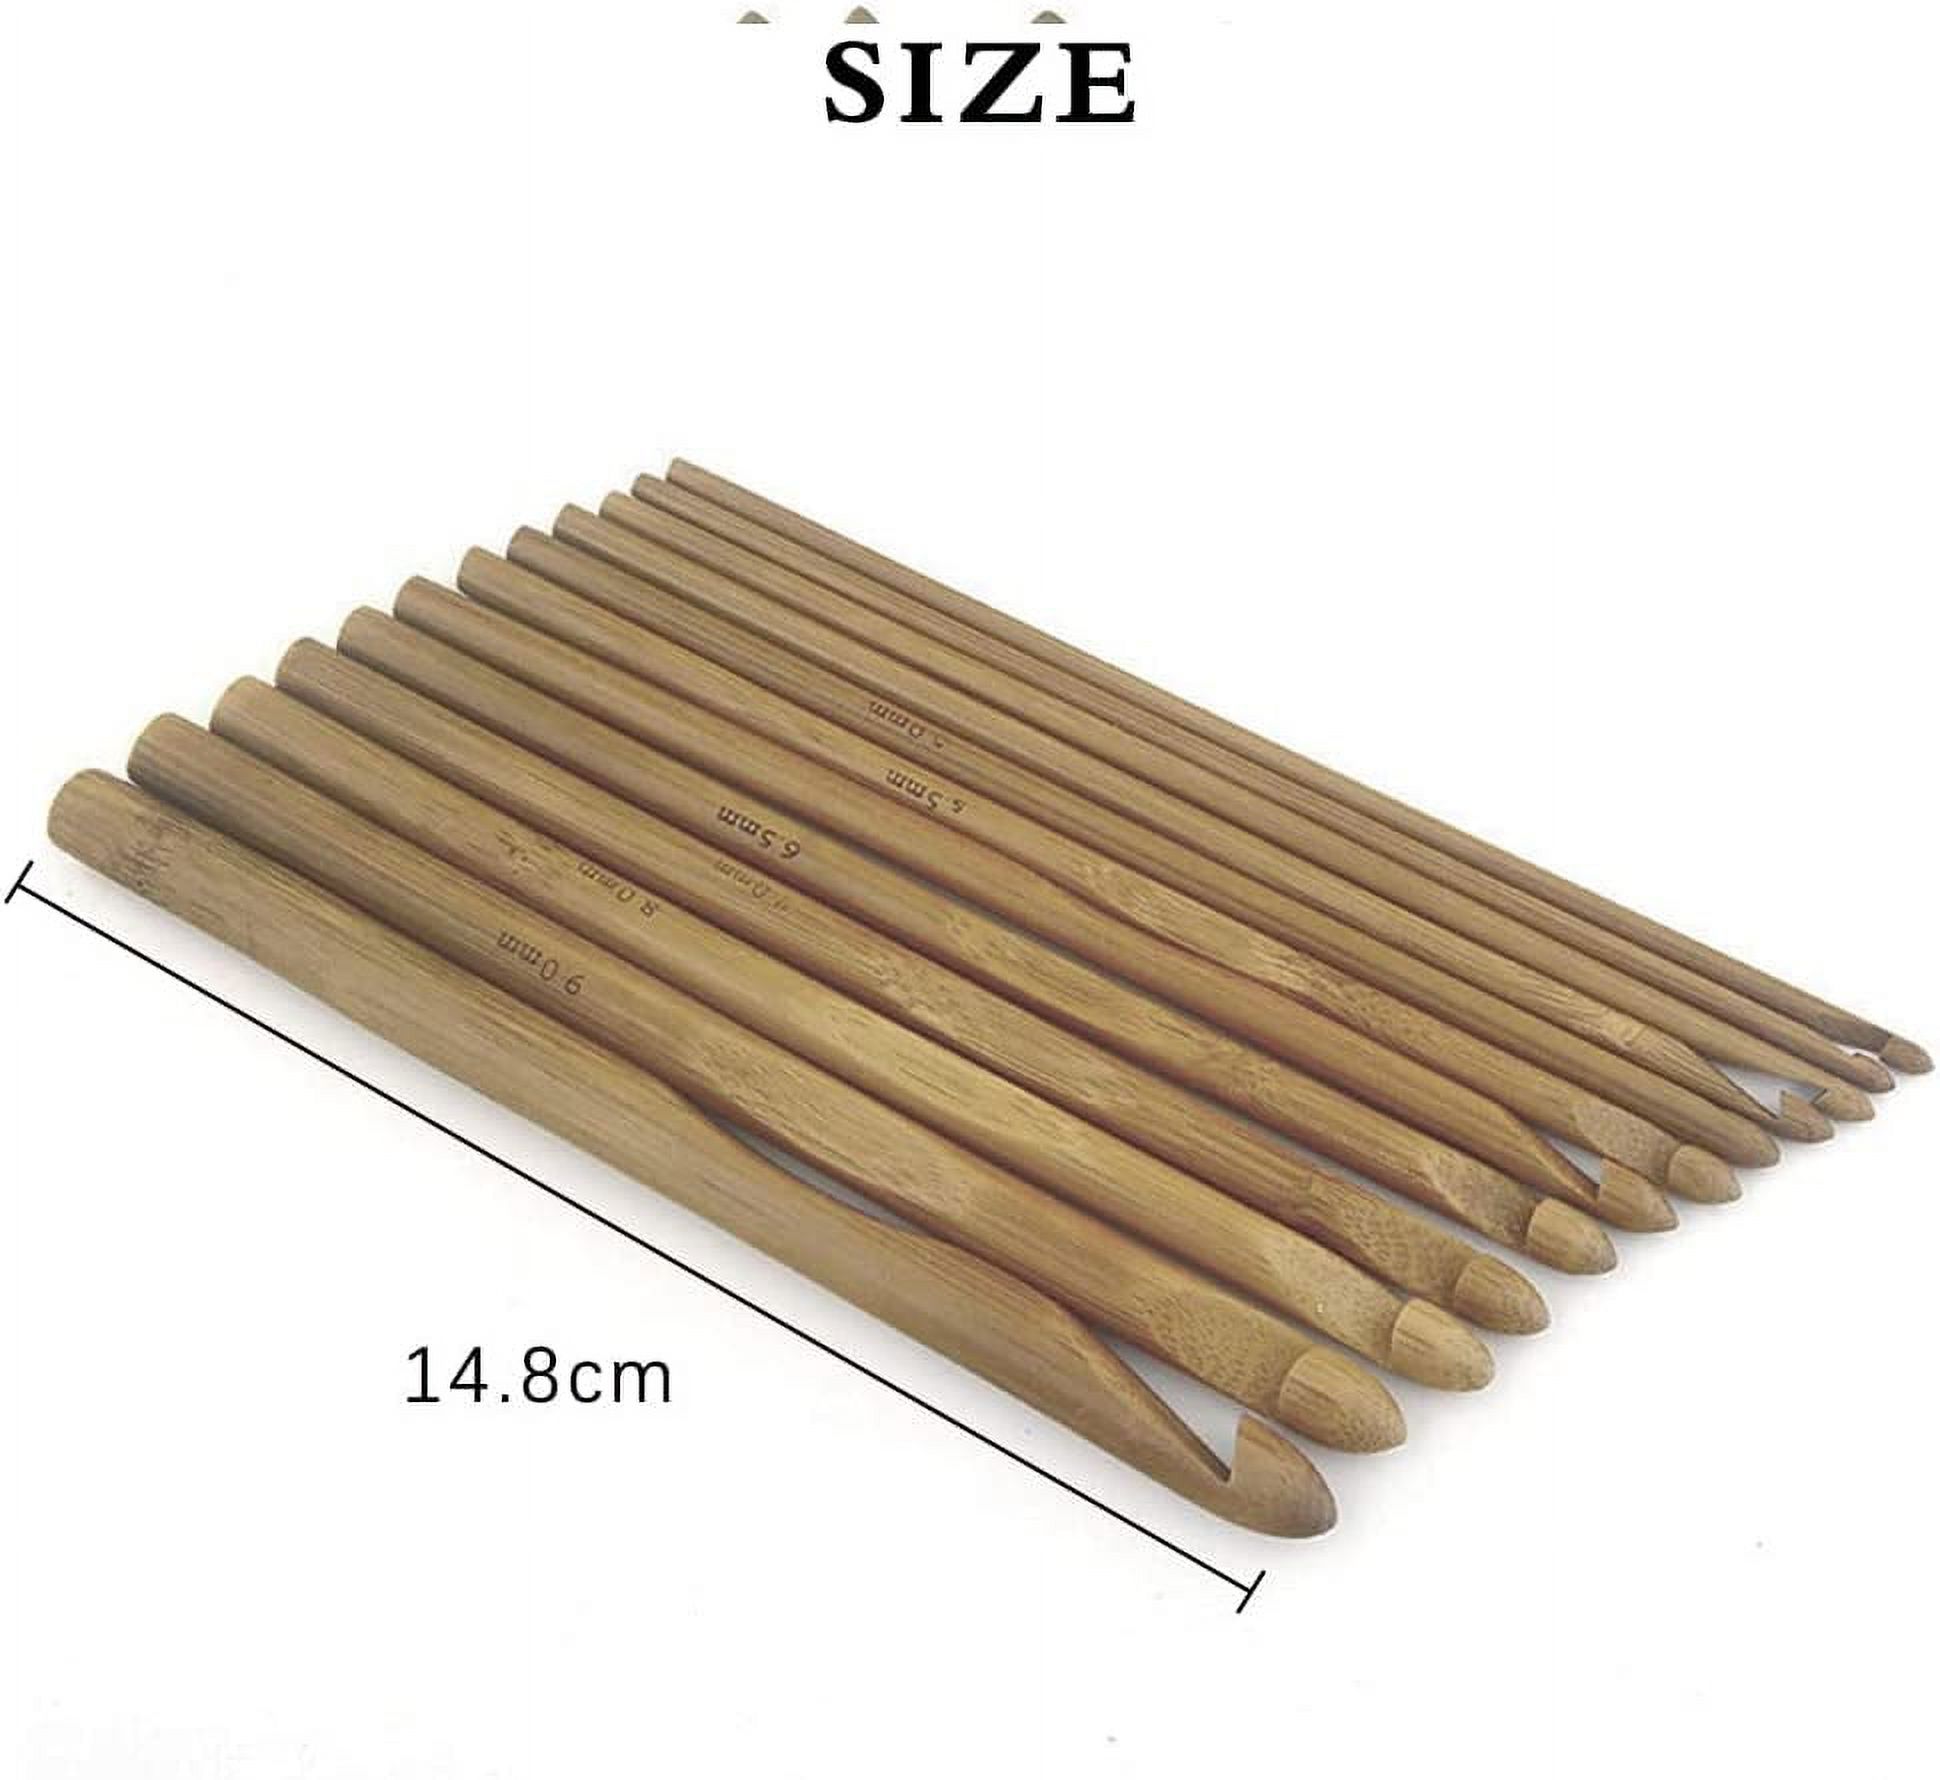 12 Pieces Bamboo Crochet Hooks Set, Large Crocheting Hook Knitting Needles  for Coarse Yarn (12 Sizes 3mm to 10mm in Diameter) 